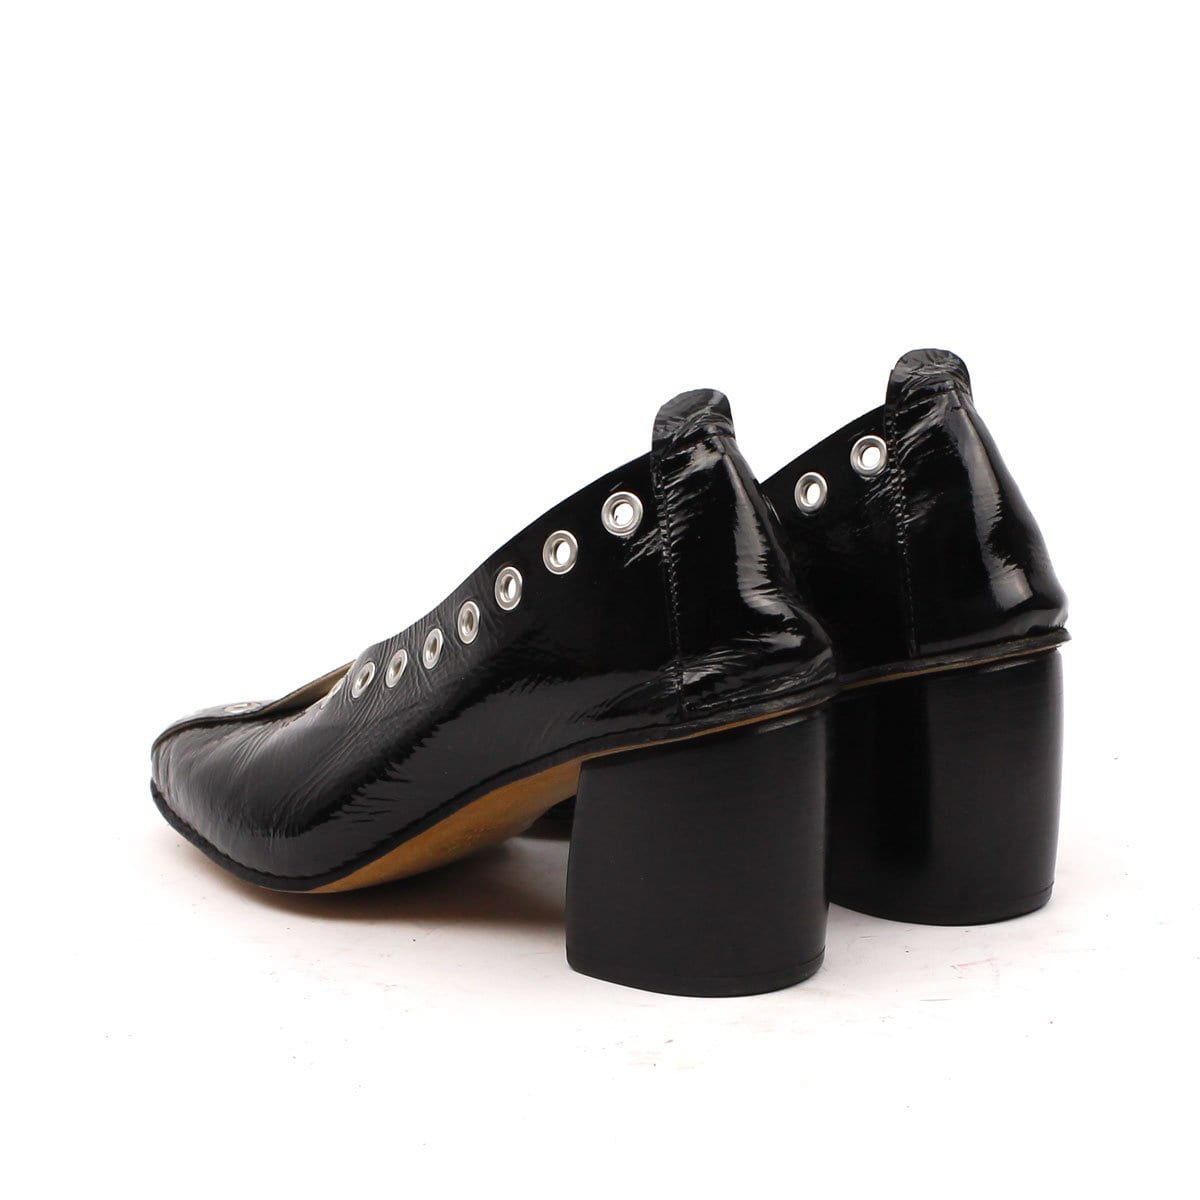 1) leather pump with studs -